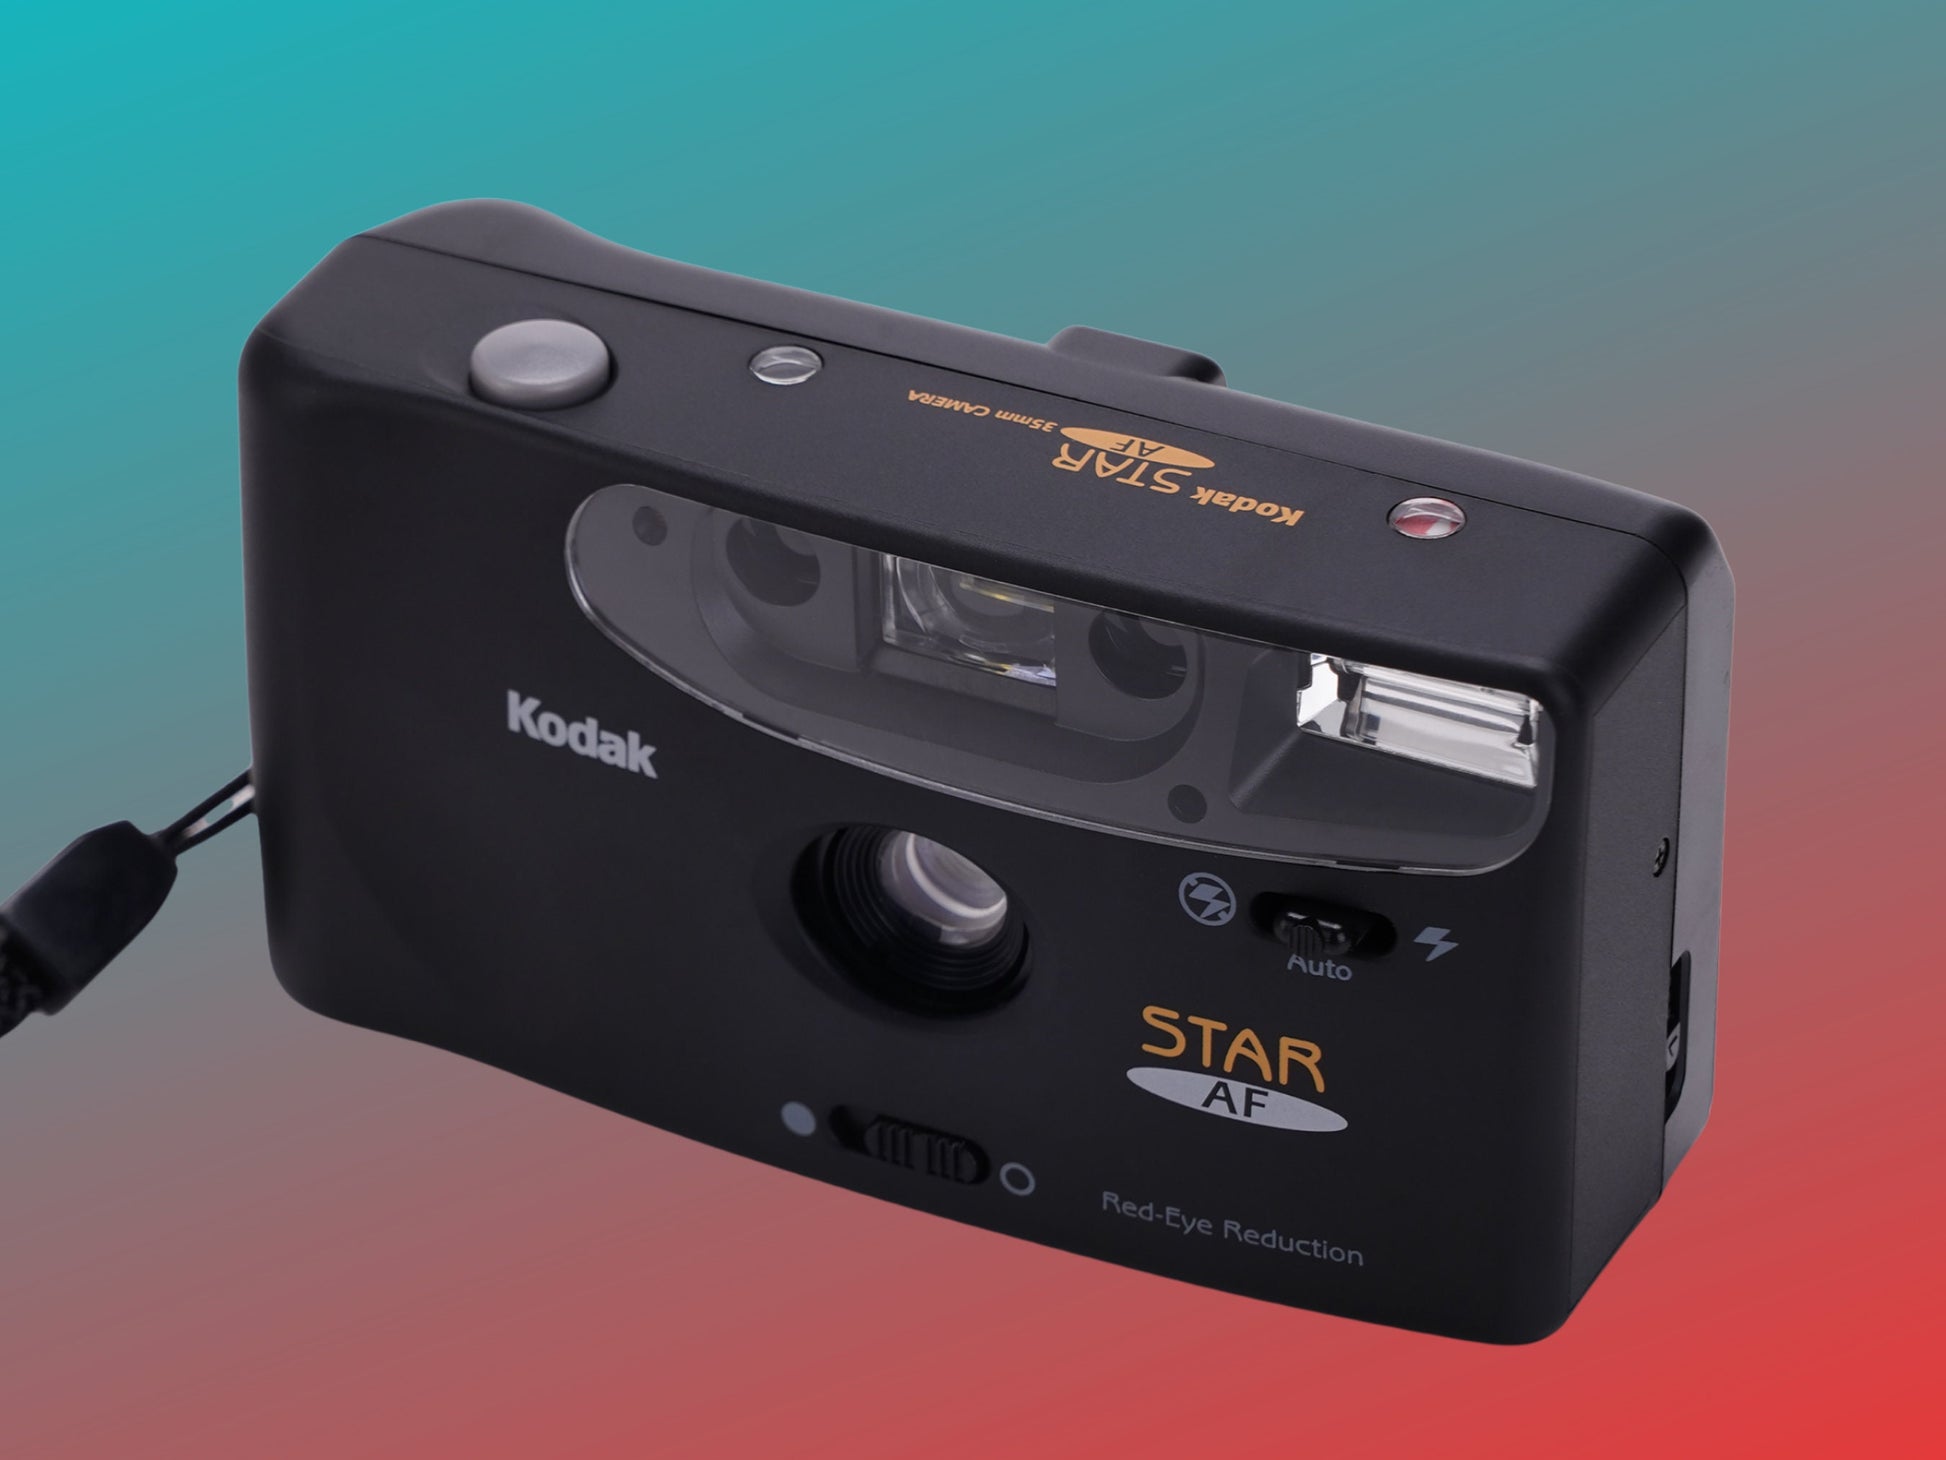 New arrival!! Kodak Instant Camera, Kodak Star AF, Fully Tested and Perfectly Working - Vintage Polaroid Instant Cameras